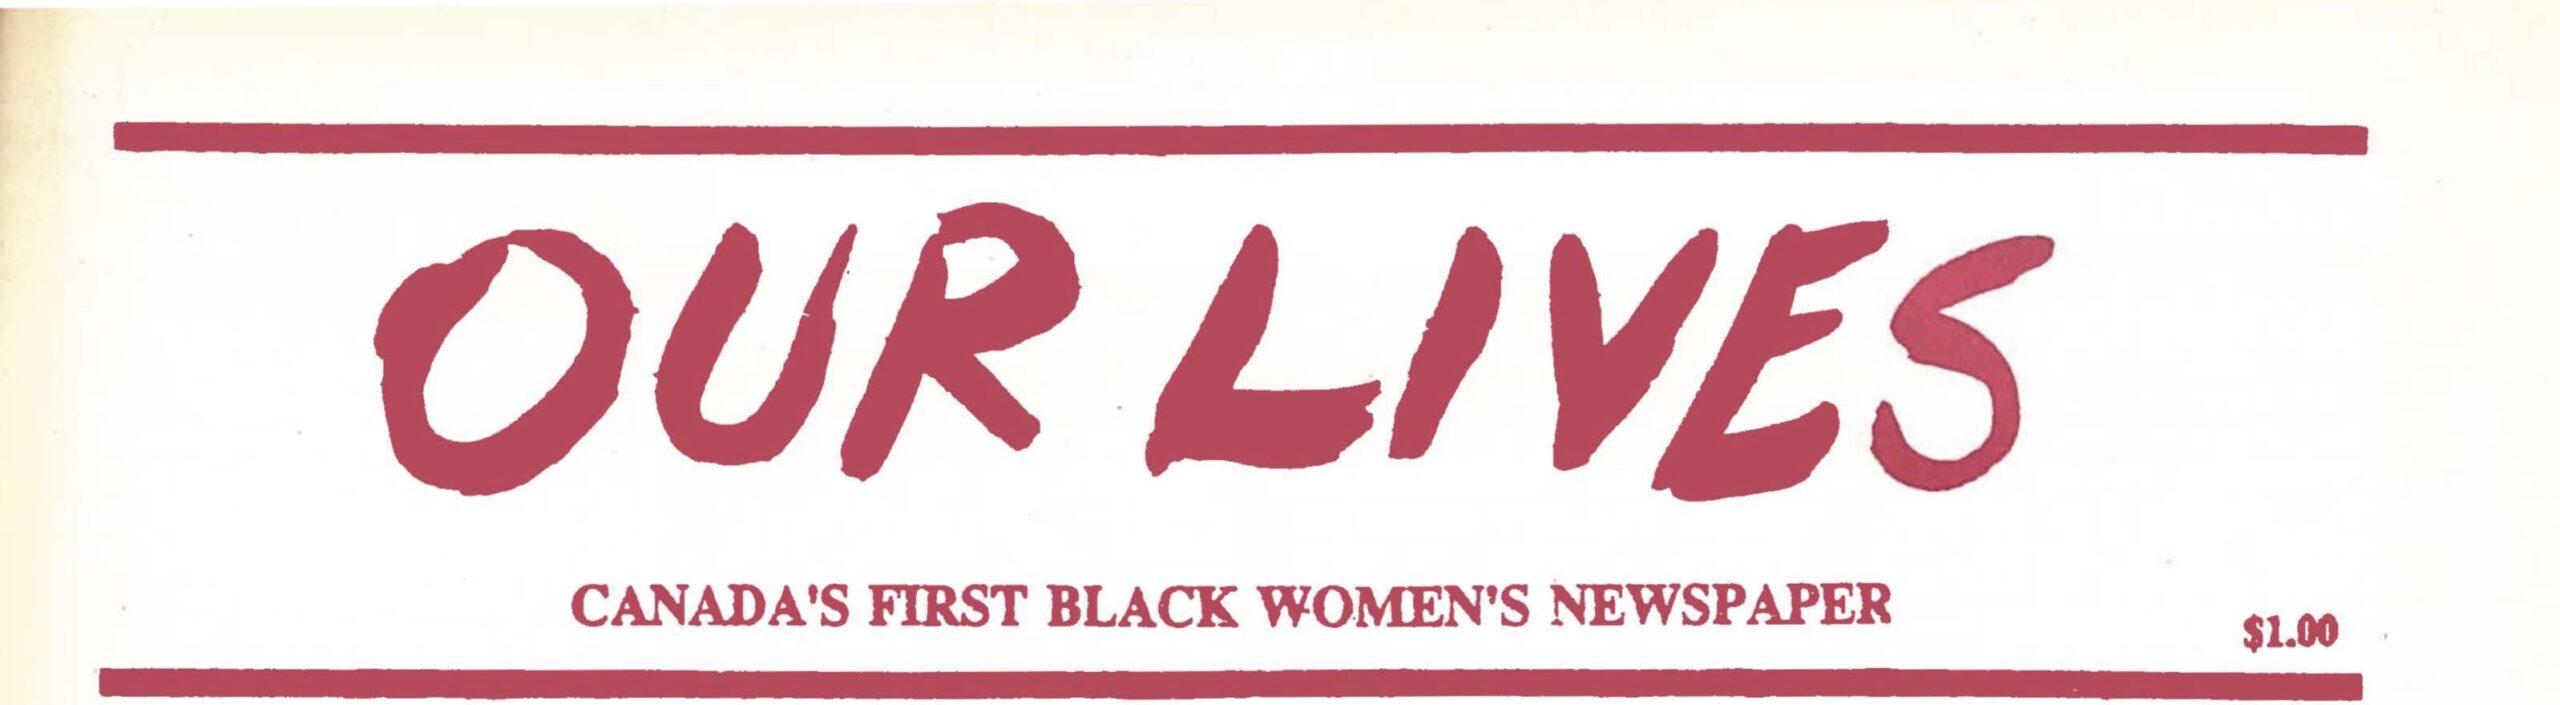 Screenshot of a newspaper that reads "OUR LIVES Canada's First Black Women's Newspaper" in red